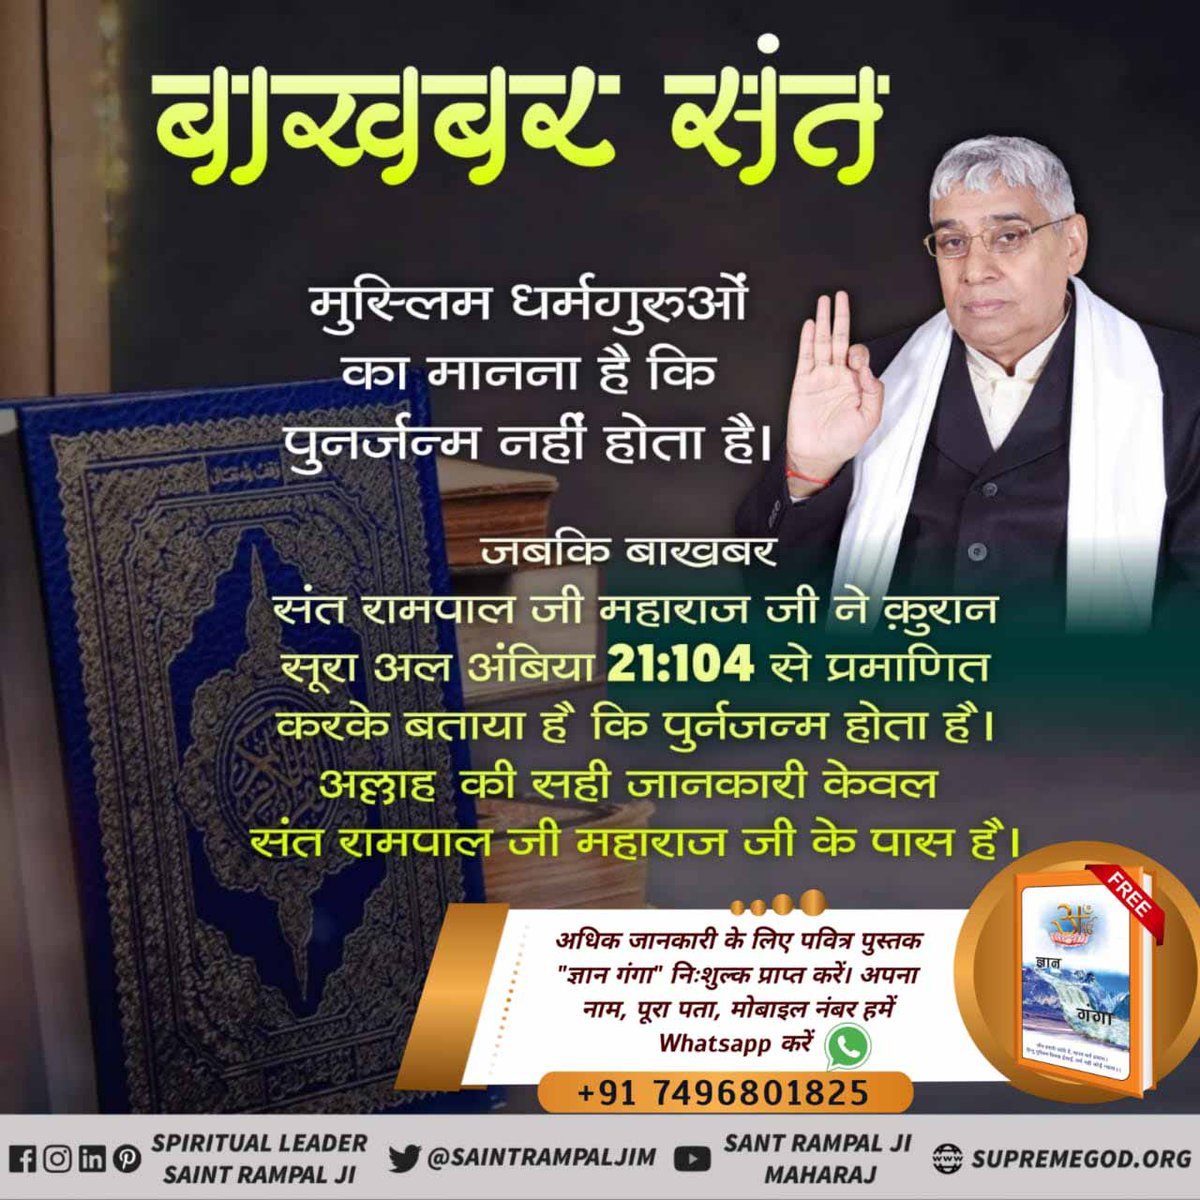 #अल्लाह_का_बाख़बर
Baakhabar In Quran 
Muslim religious leaders believe that rebirth does not occur.  While Bakbar Saint Rampal Ji attested from Quran Sura Ambiya 21 verse 104, it is mentioned that rebirth takes place.
Baakhabar Sant Rampal Ji